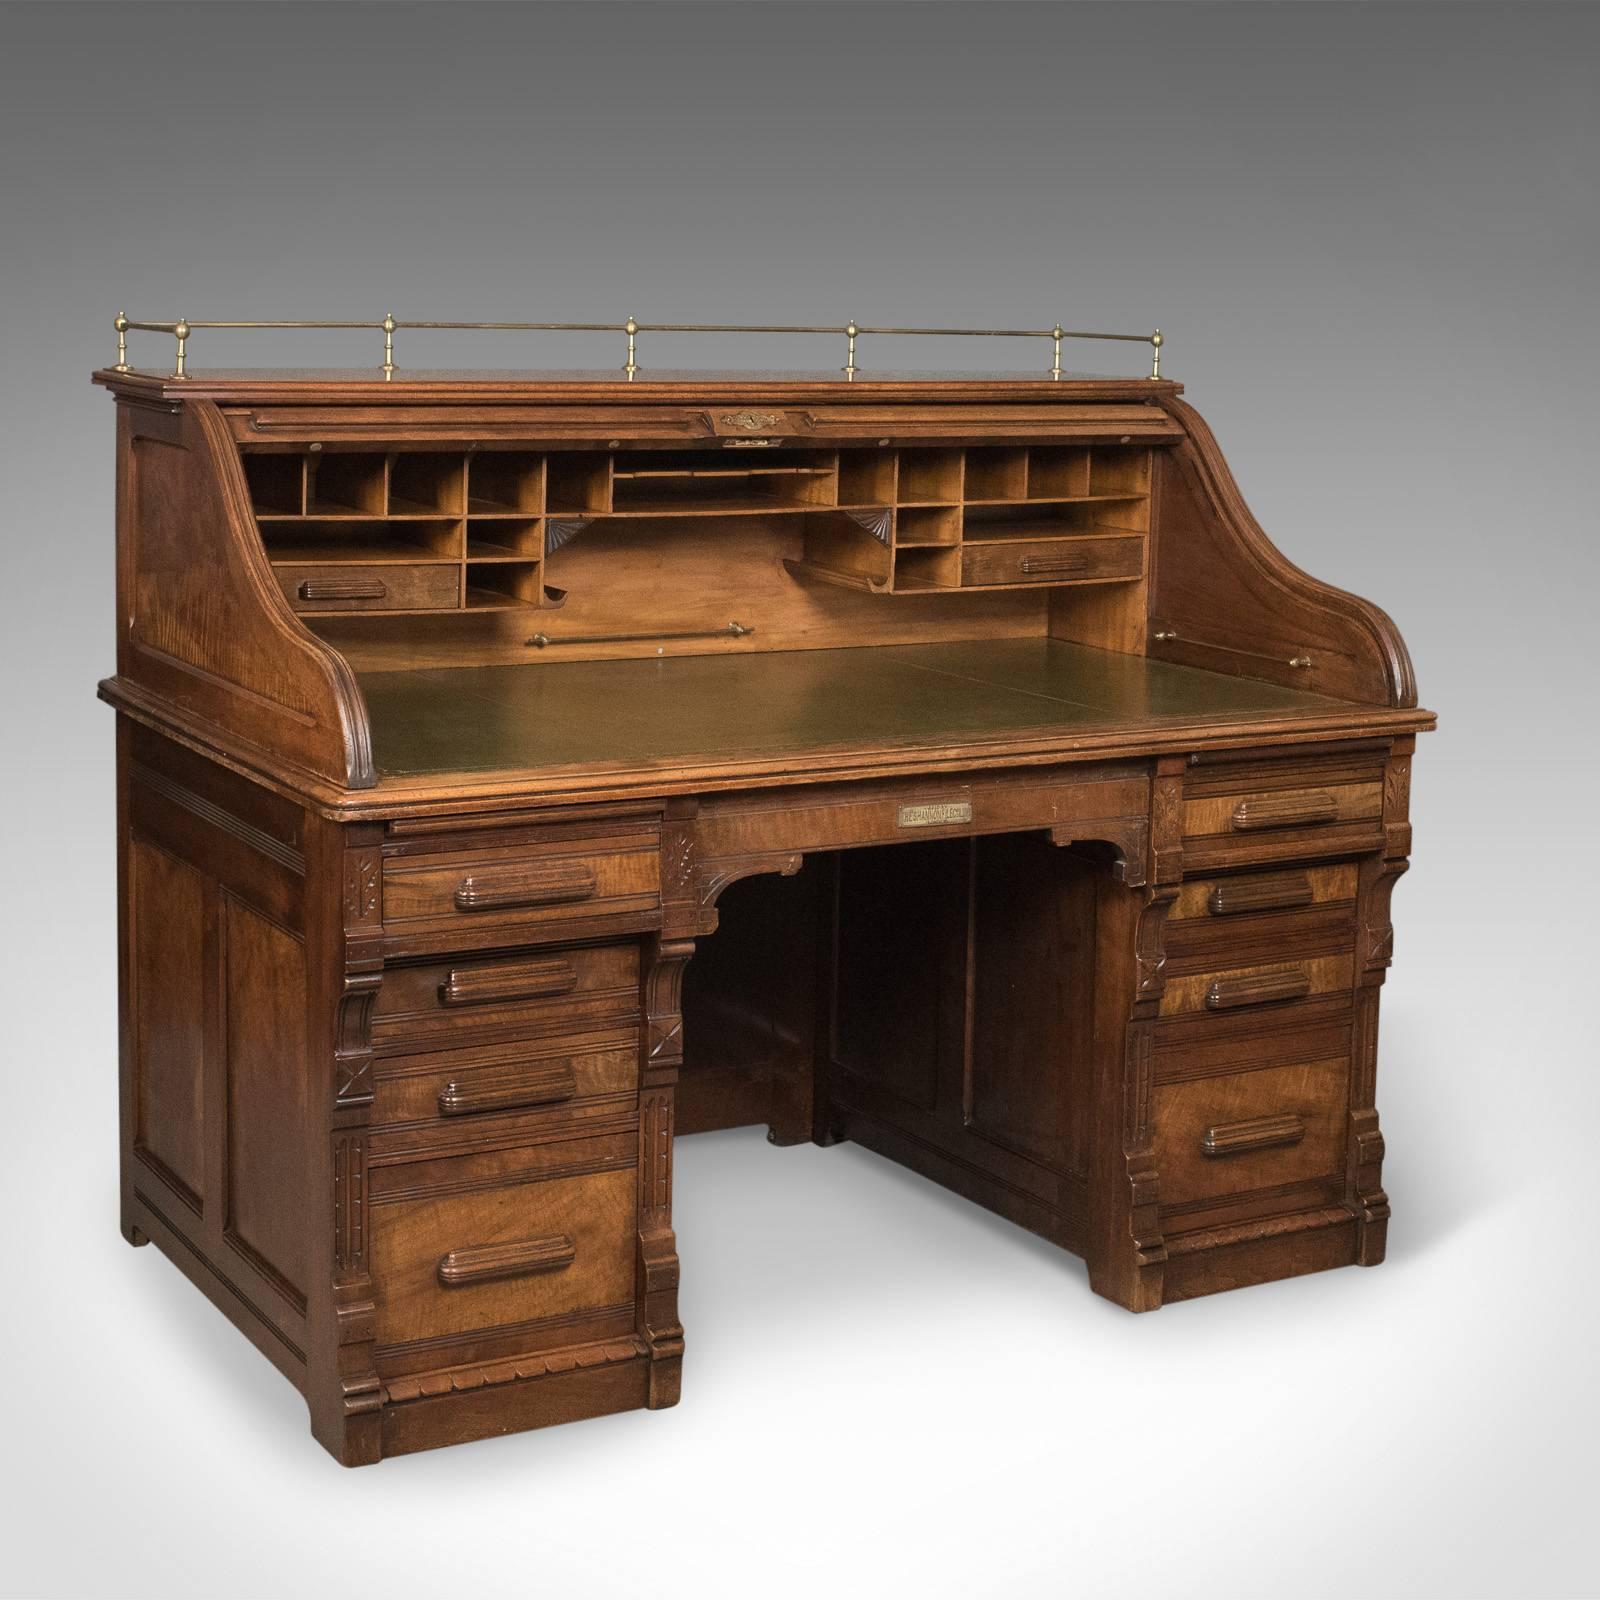 This is an antique roll top desk in English walnut by the Shannon File Co., London, Edwardian dating to circa 1900. 

A very fine example with a show back – ideal for centre room placement
English walnut displaying good consistent color with a